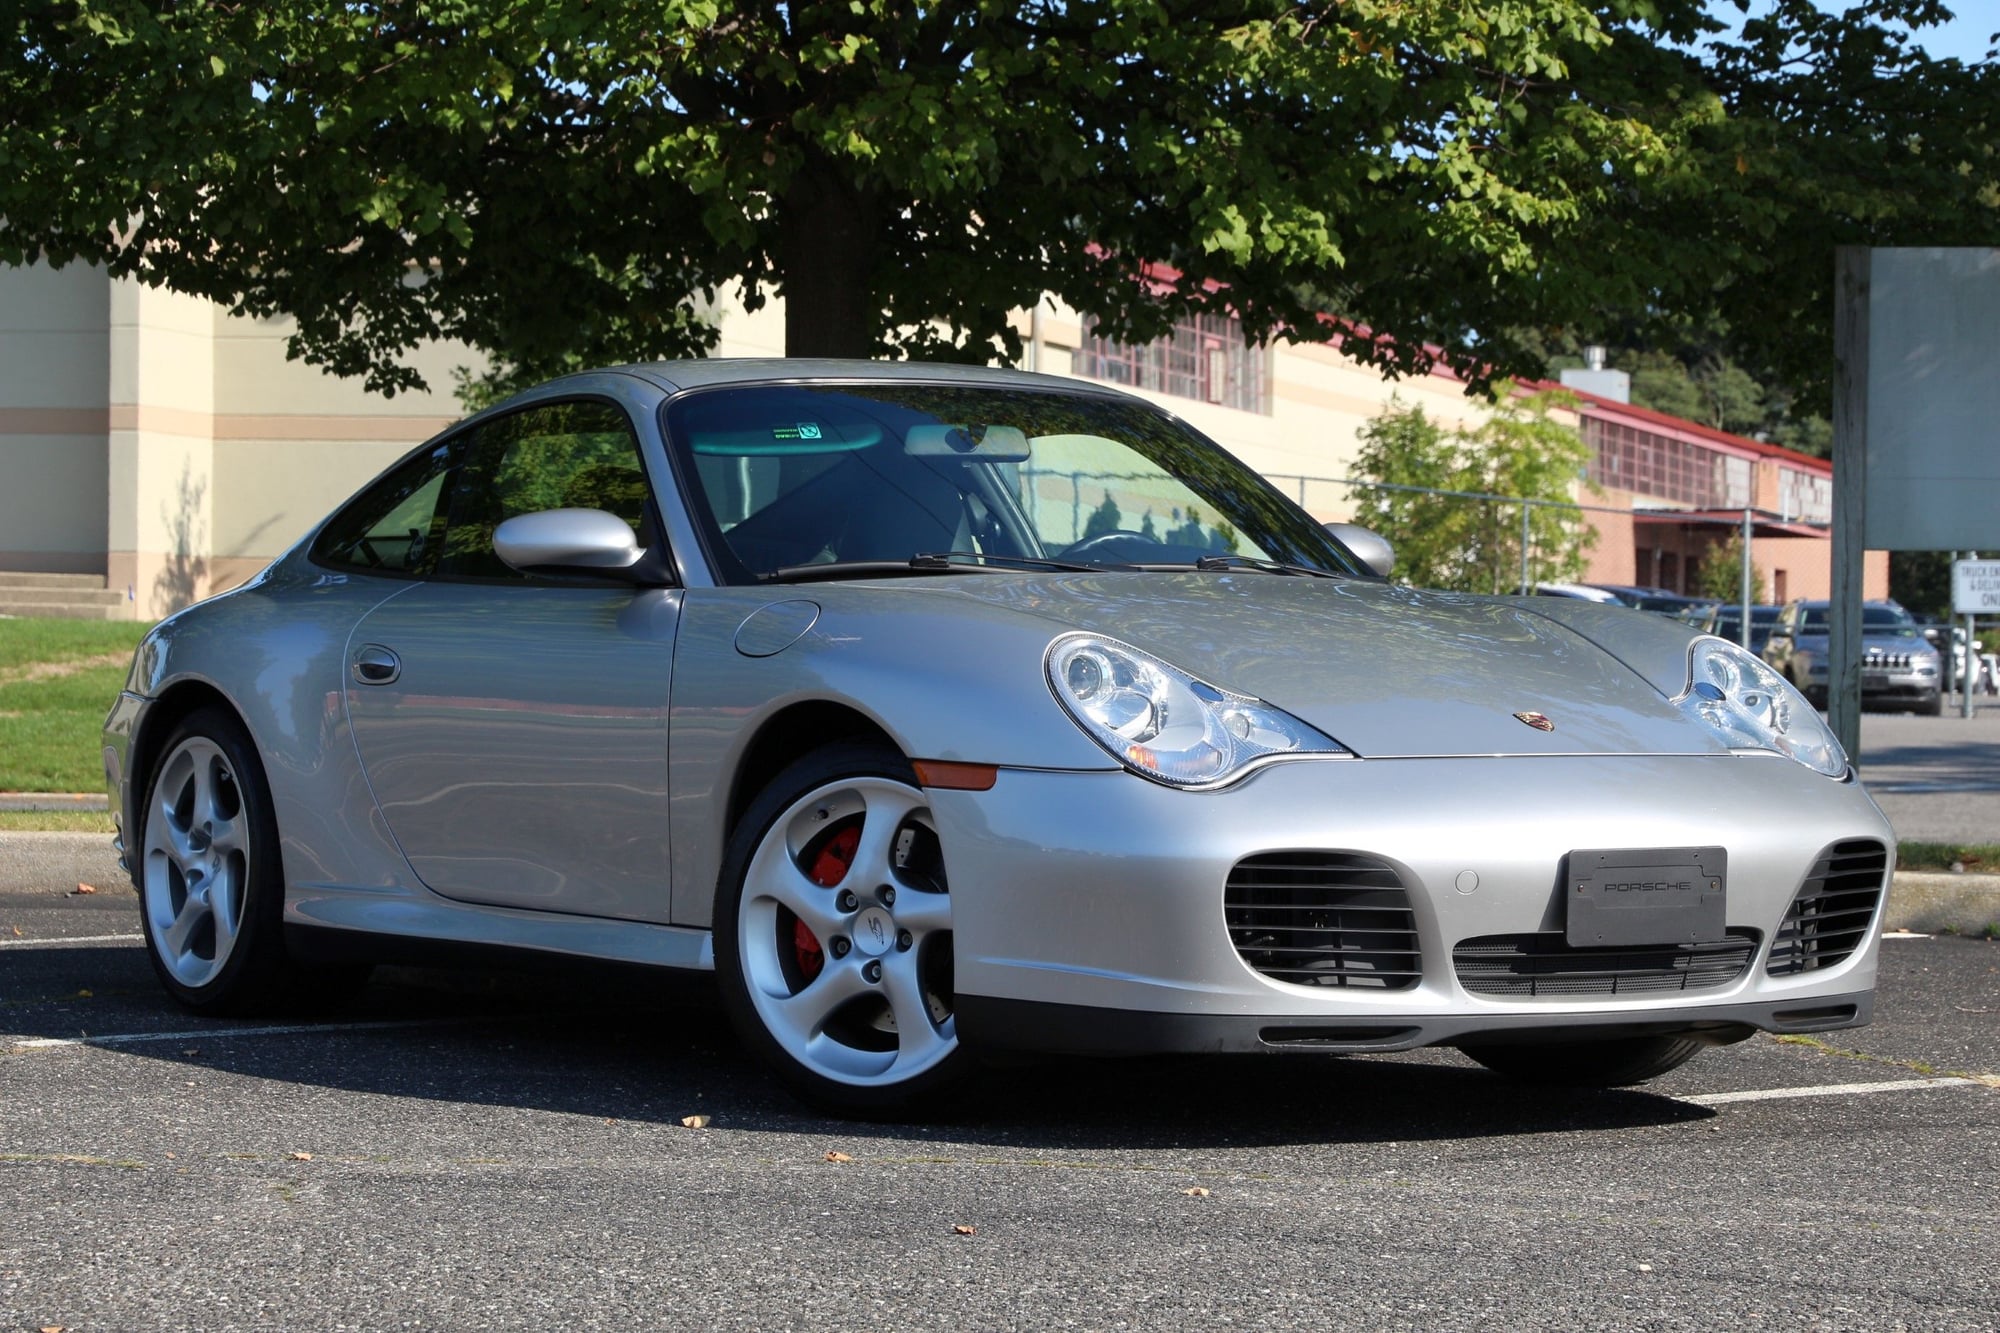 2003 Porsche 911 - FS: 2003 Porsche 911 Carrera 4S 996 6-Speed Manual Silver/Black - Used - VIN WP0AA29903S620595 - 61,030 Miles - 6 cyl - AWD - Manual - Coupe - Silver - Brooklyn, NY 11229, United States